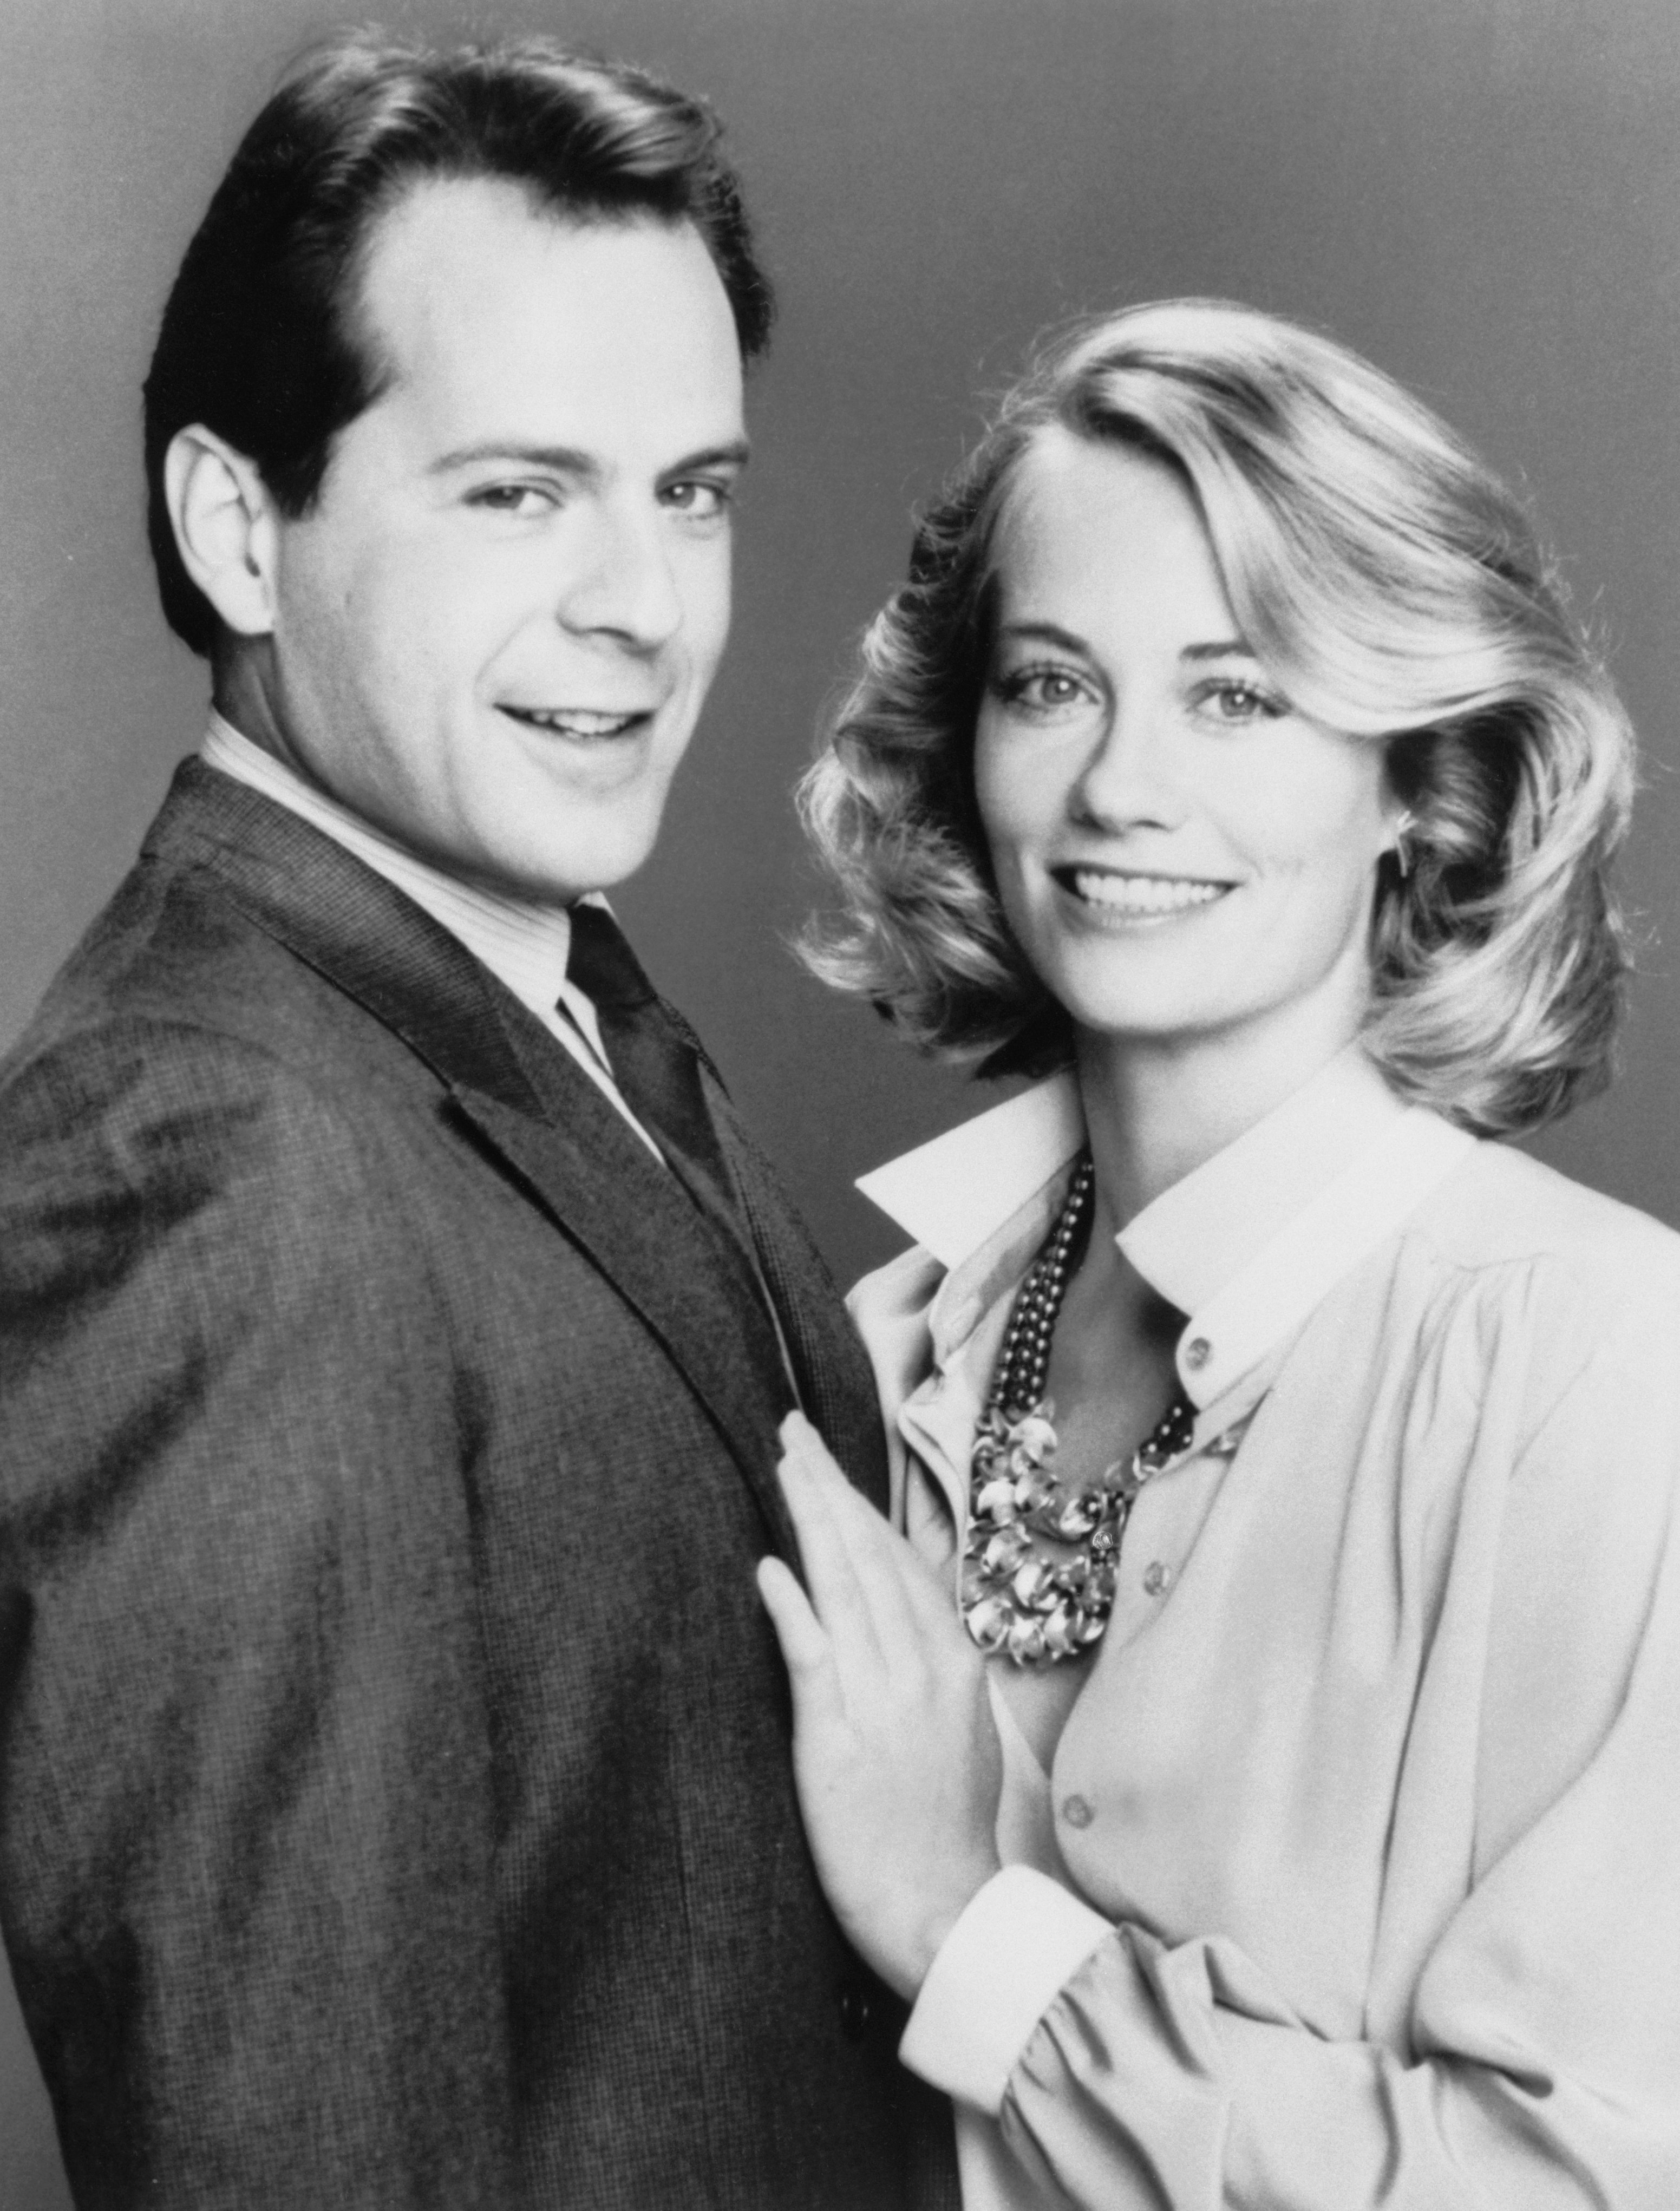 Actor Bruce Willis as David Addison and actress Cybill Shepherd as Maddie Hayes in the mystery dramedy "Moonlighting" aired from 1985 to1989. / Source: Getty Images